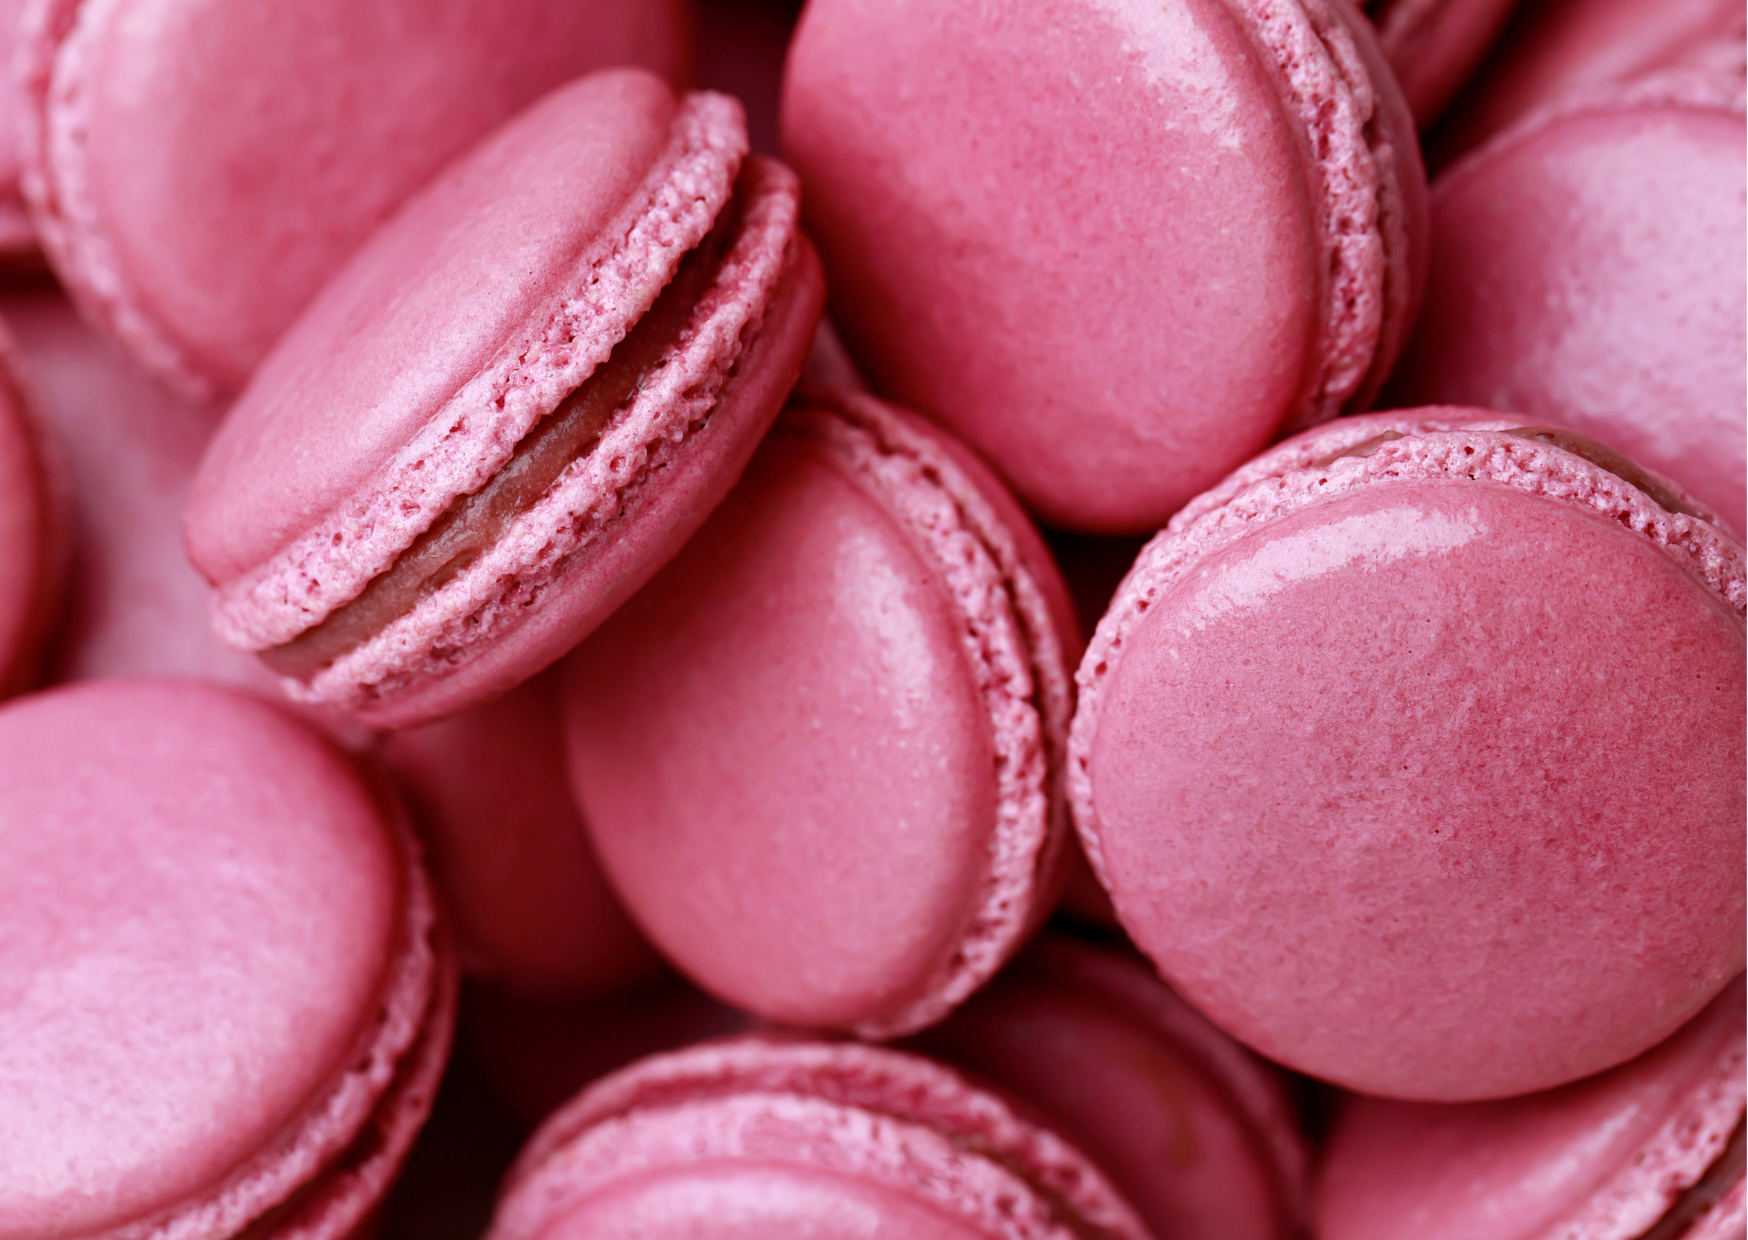 Macarons baked by female golfers. Photo: Renate Roeleveld.